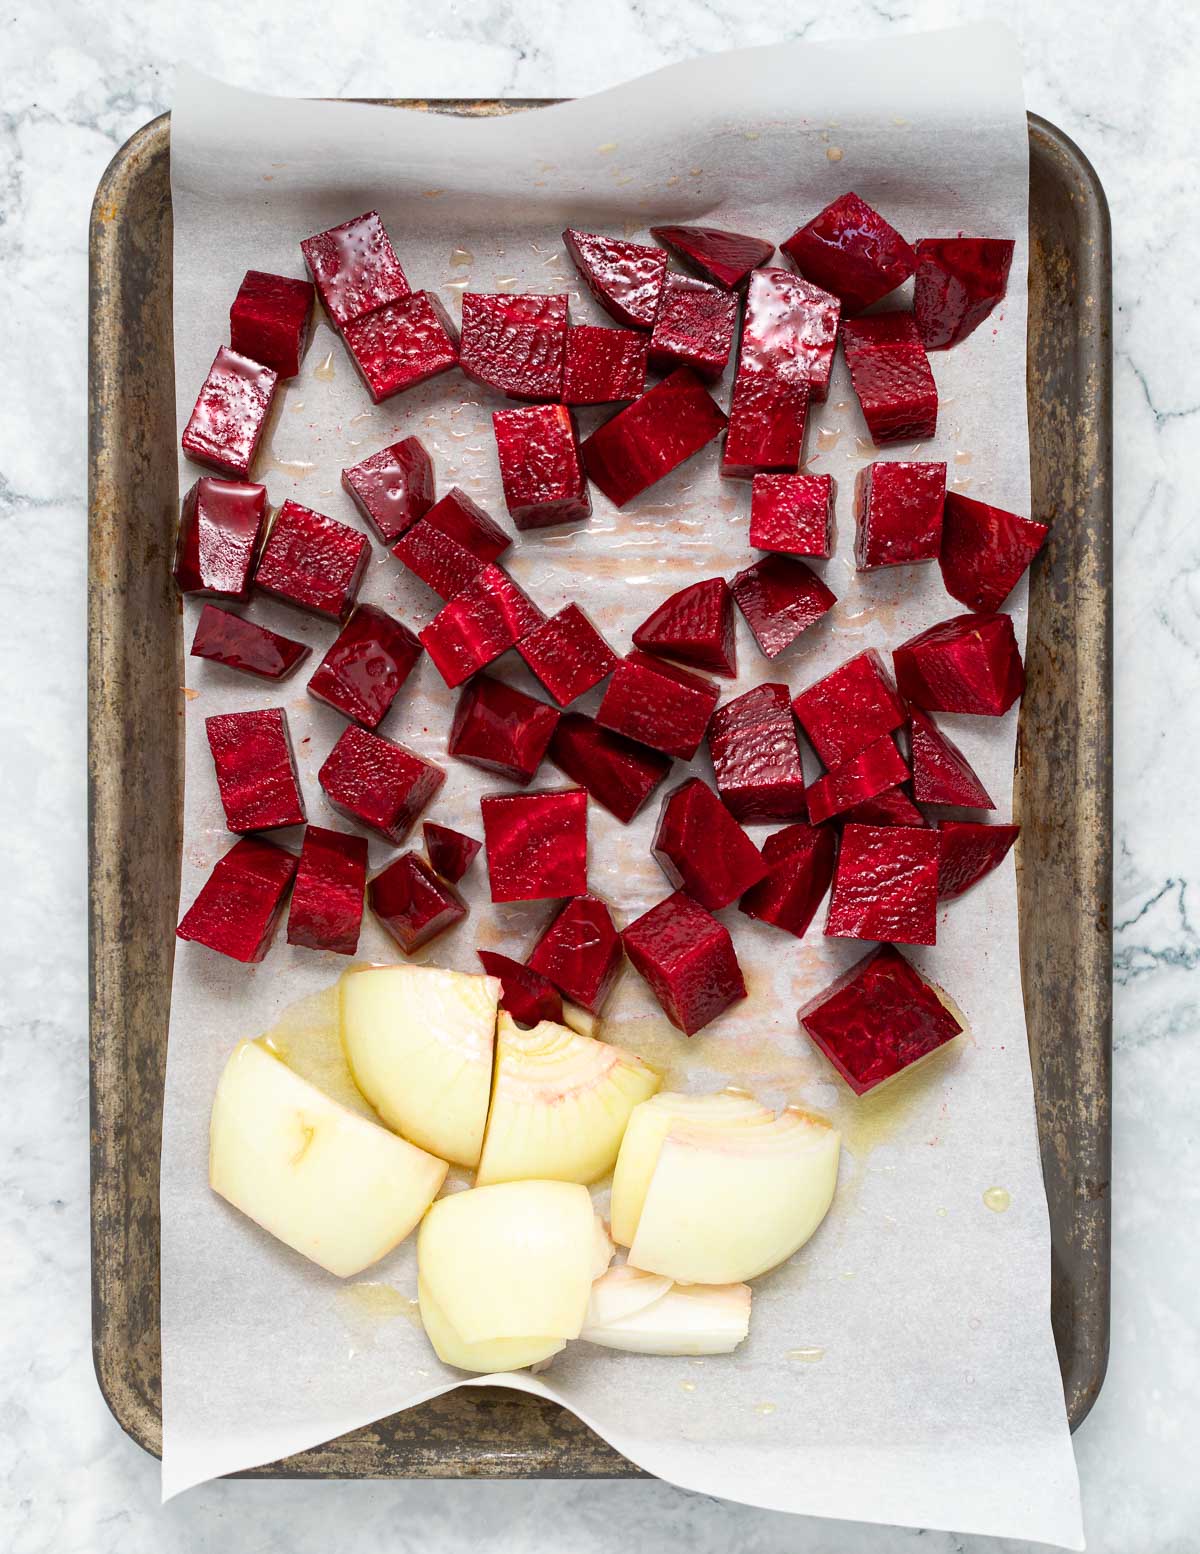 beets and onion on a baking tray